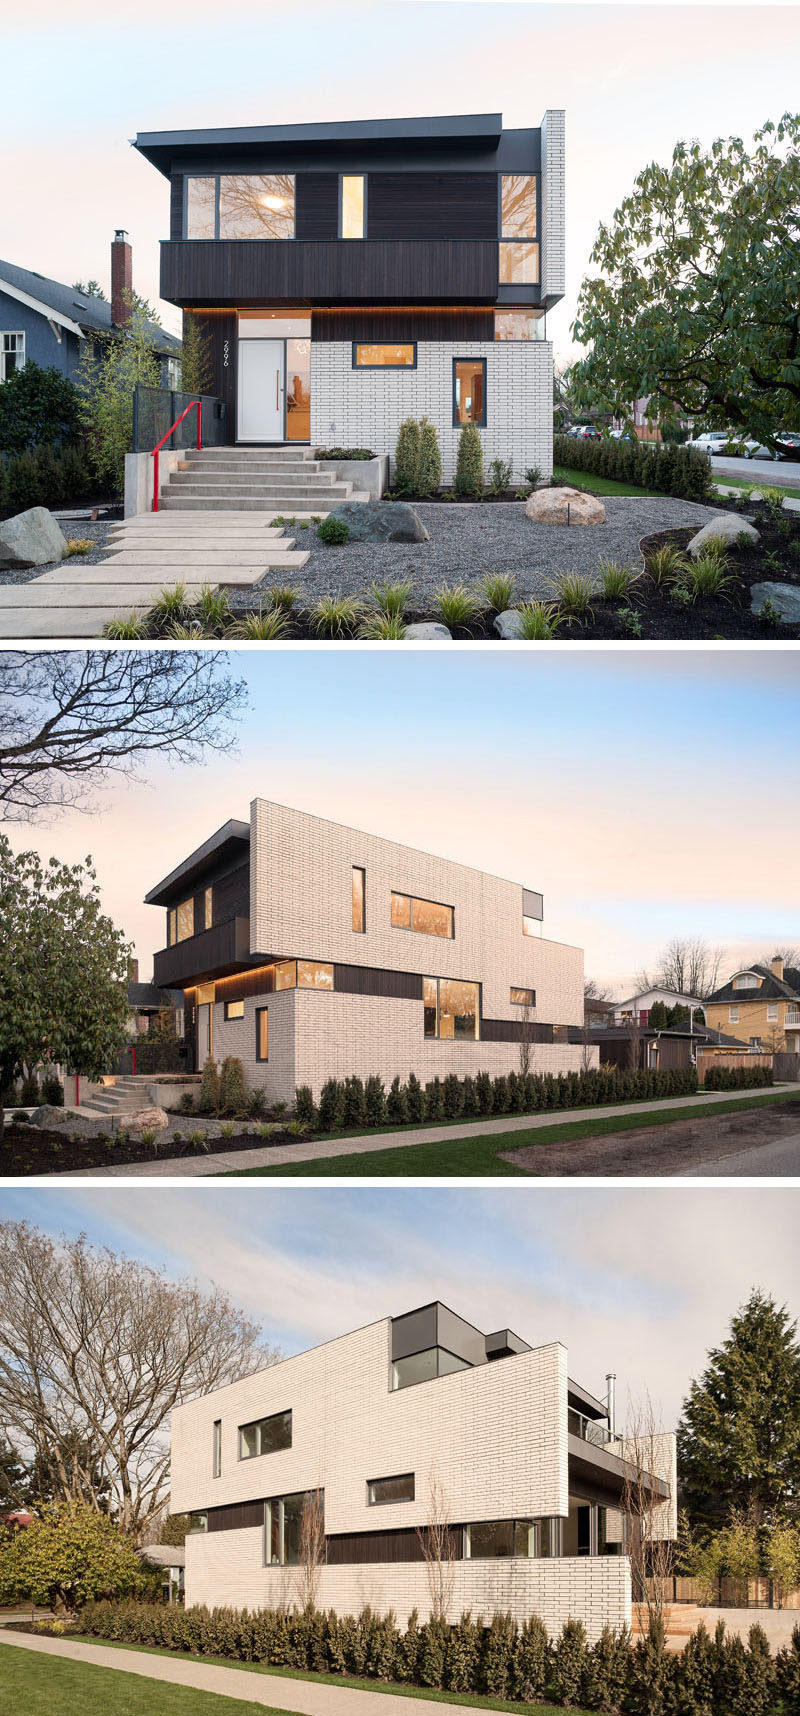 14 Modern Houses Made Of Brick // White bricks cover much of the exterior of this home and contrast the dark cedar siding and metal trim also included in the exterior design.